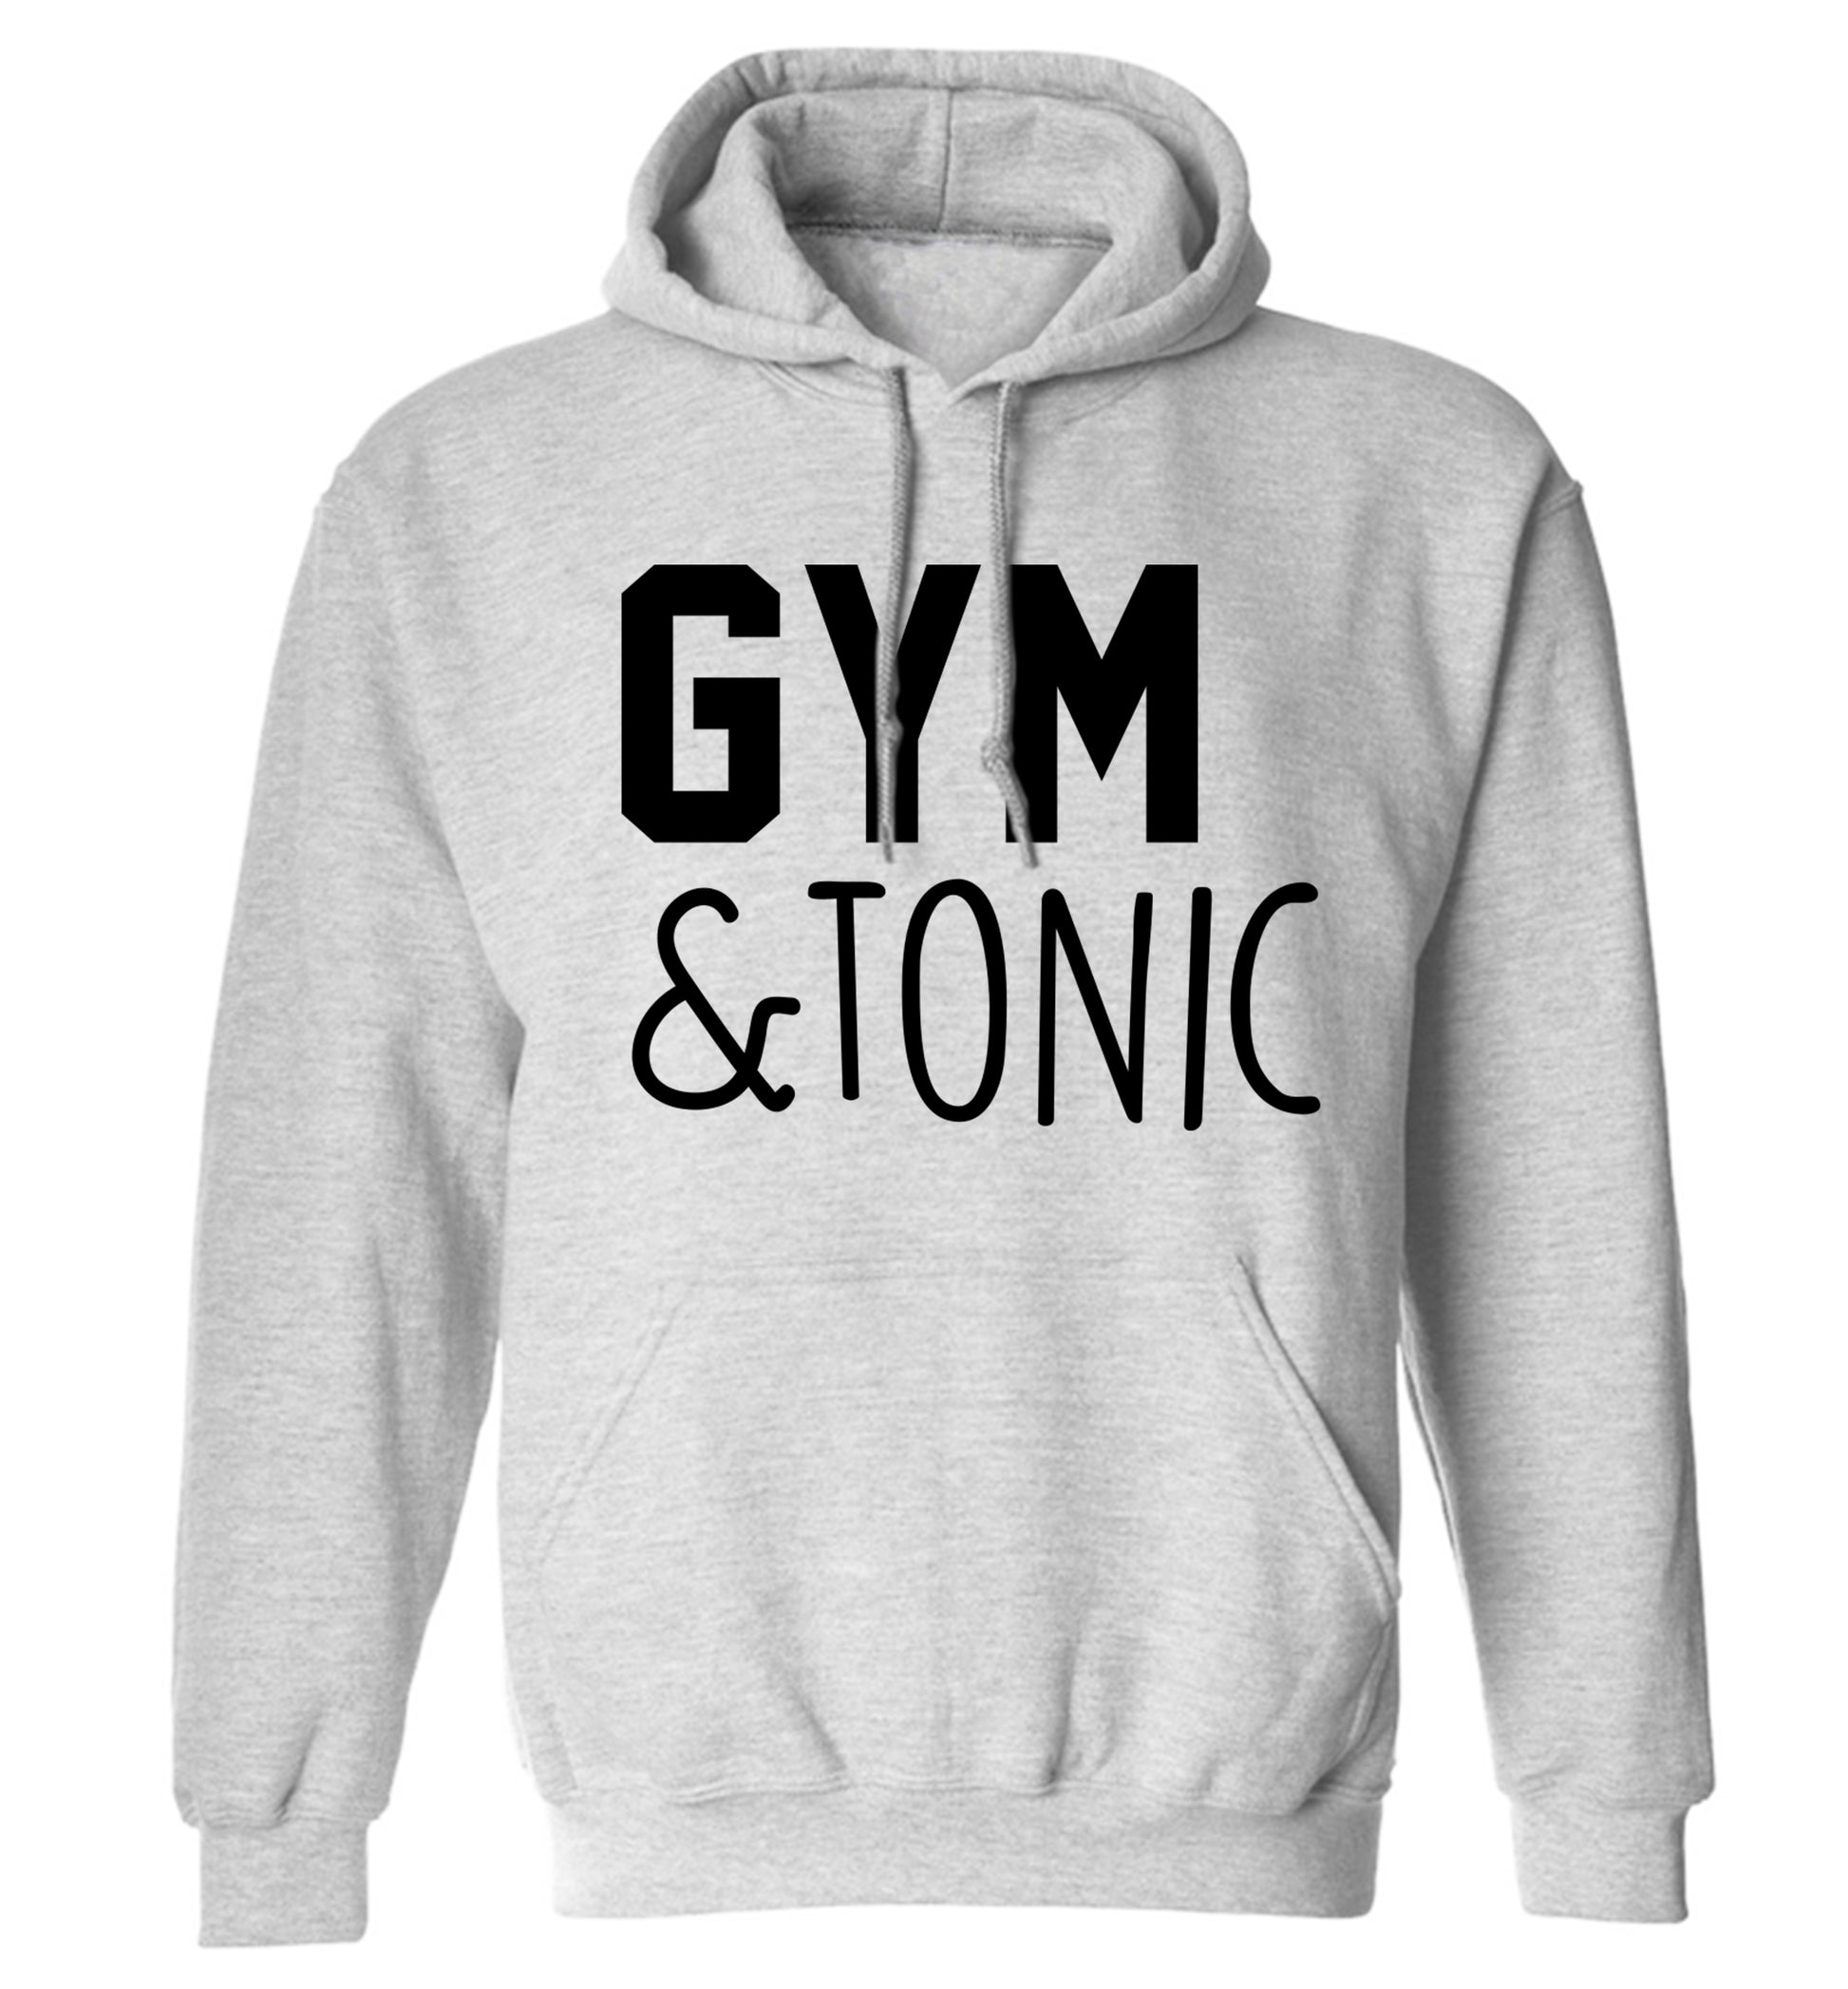 Gym and tonic adults unisex grey hoodie 2XL